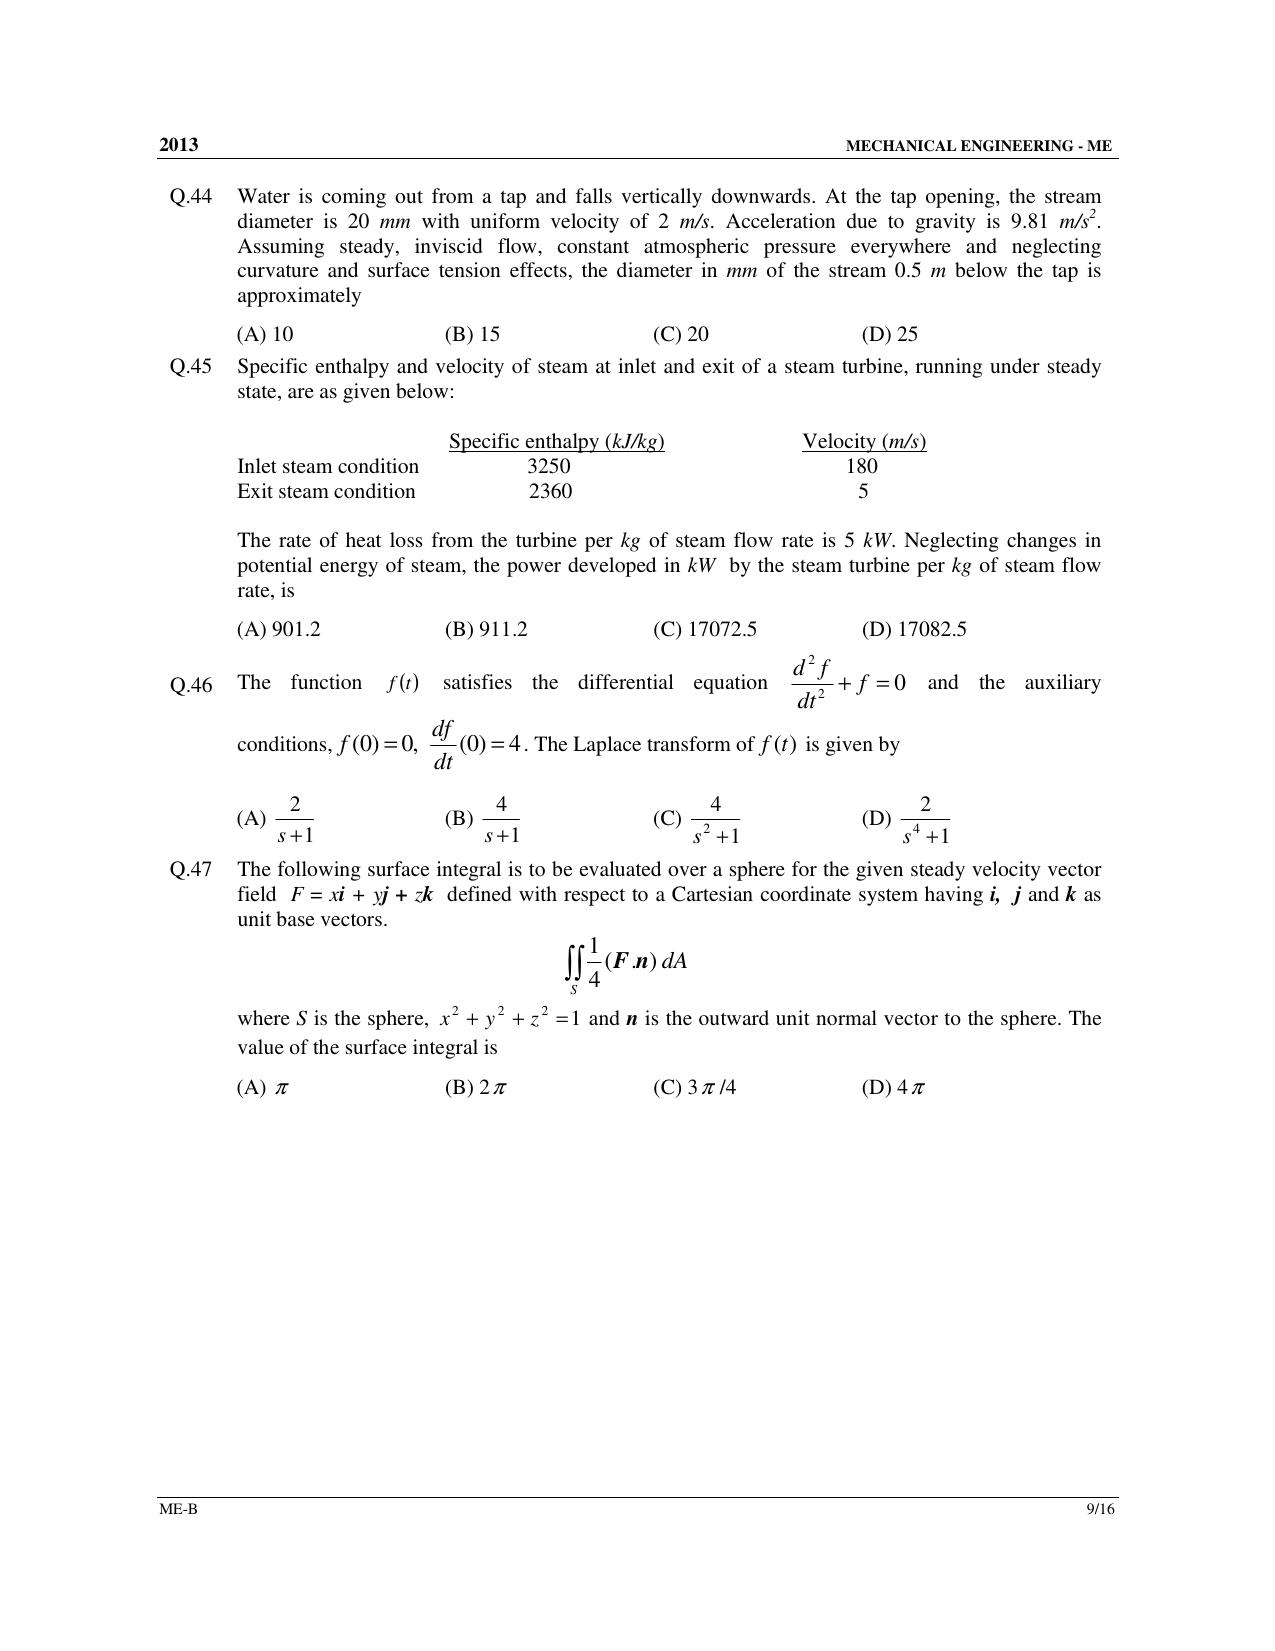 GATE 2013 Mechanical Engineering (ME) Question Paper with Answer Key - Page 24